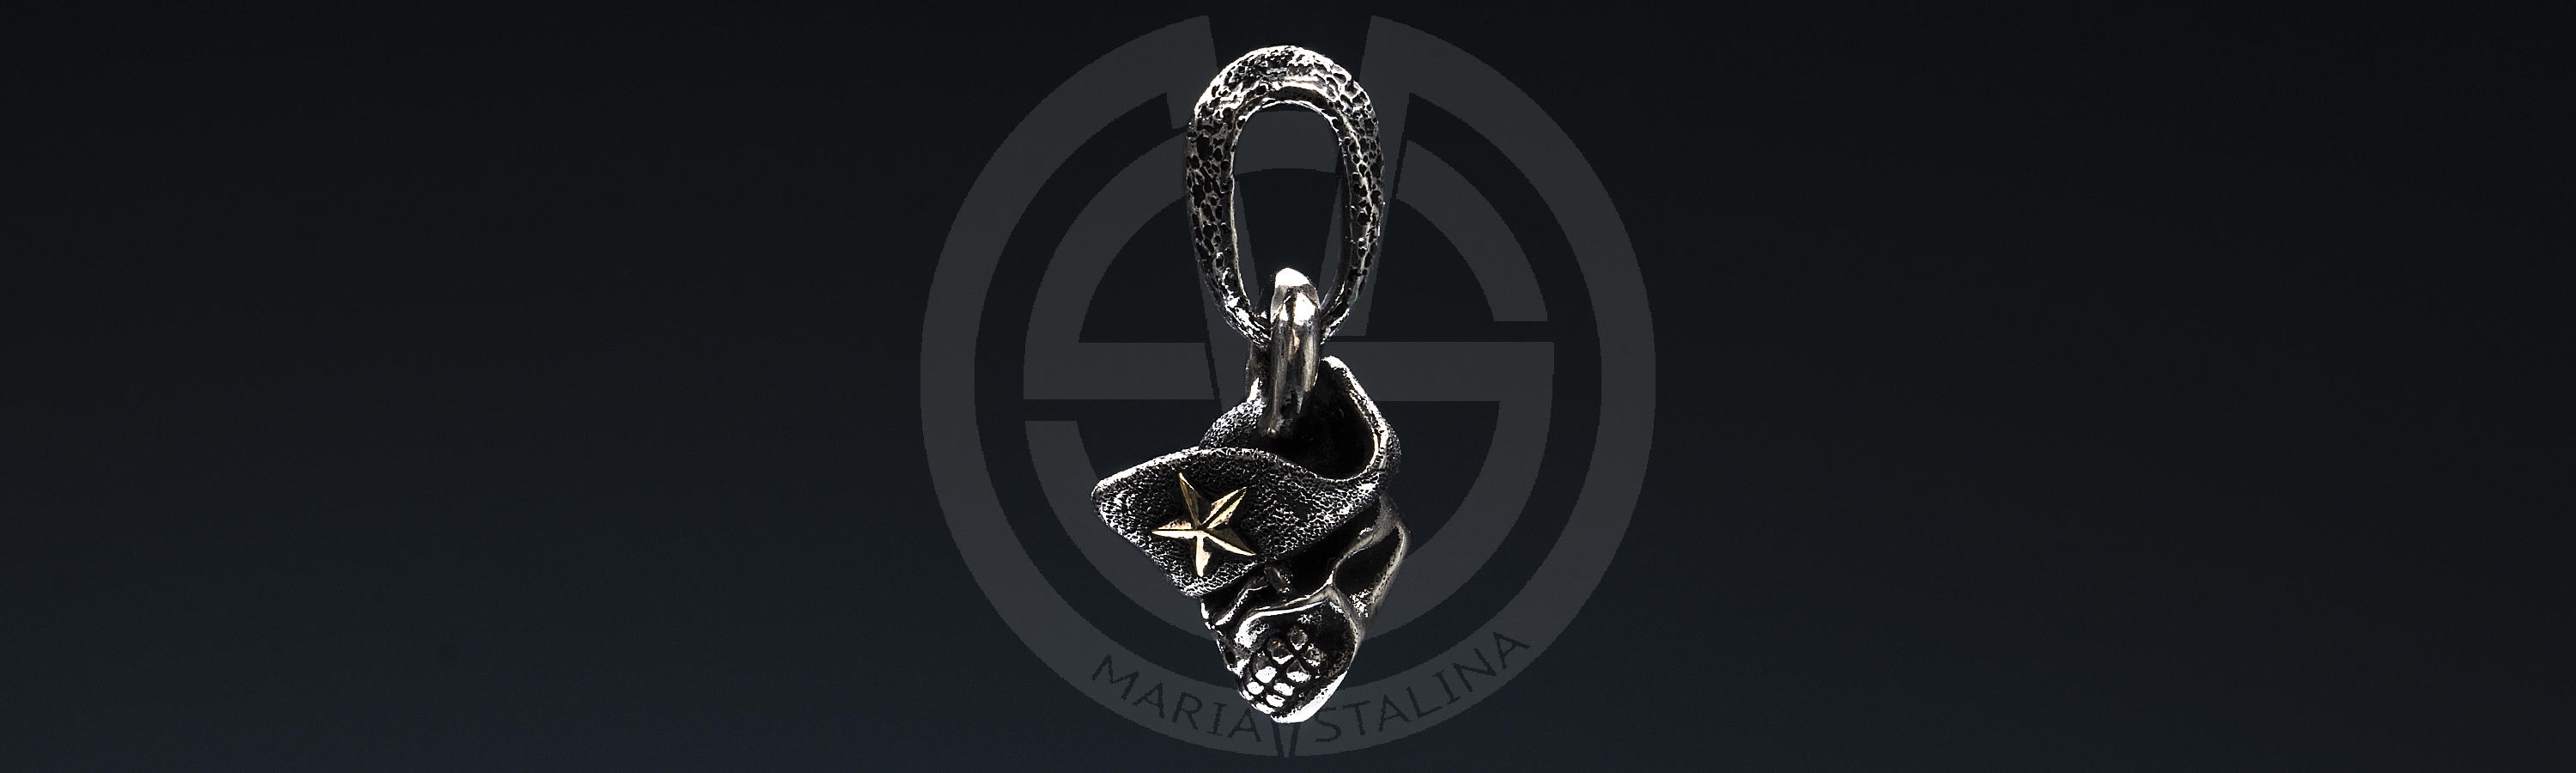 Brutal pendant with a stylish chain from Starlingear